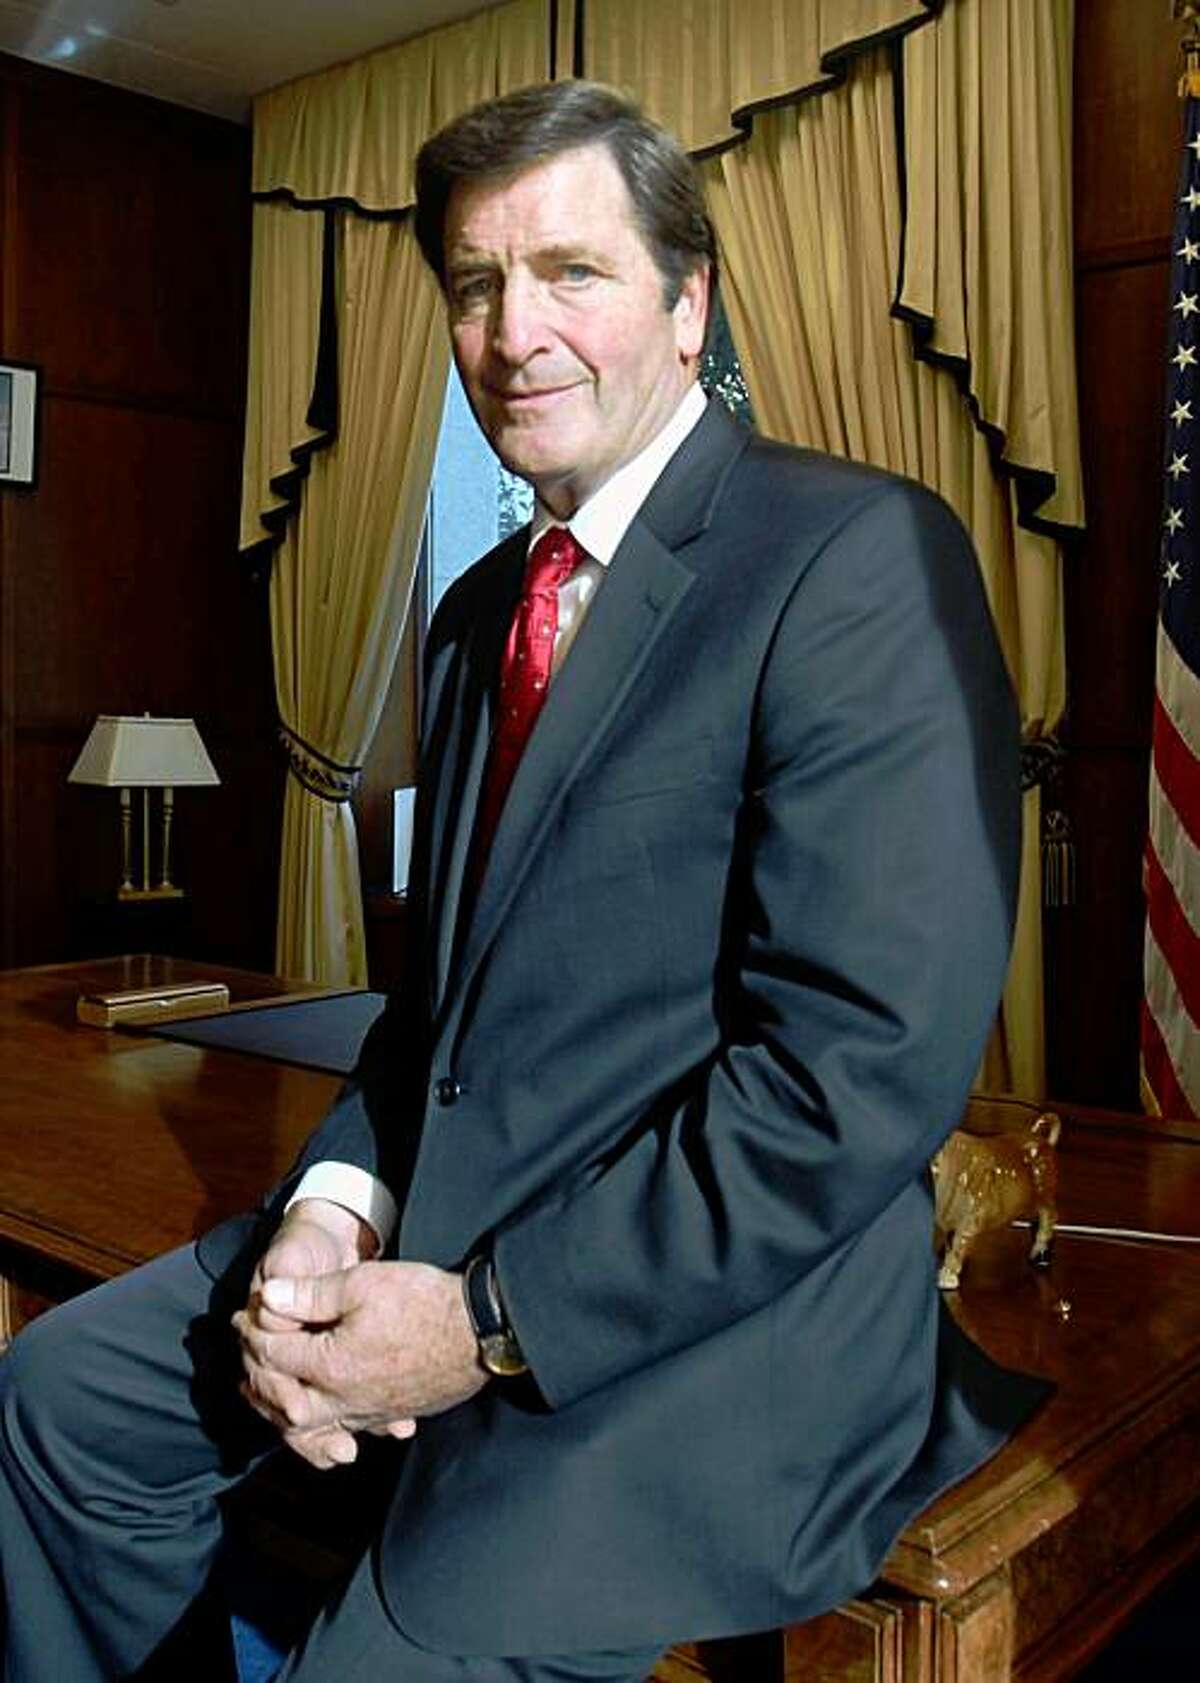 In this photo taken Tuesday, Oct. 27, 2009, Lt. Gov. John Garamendi, the Democratic candidate for the California 10th Congressional District, is seen in his Capitol office in Sacramento, Calif. Garamendi is running against Republican David Harmer in Tuesday's special election to replace former Rep. Ellen Tauscher, a Democrat who was named earlier in the year to a State Department position. (AP Photo/Rich Pedroncelli)